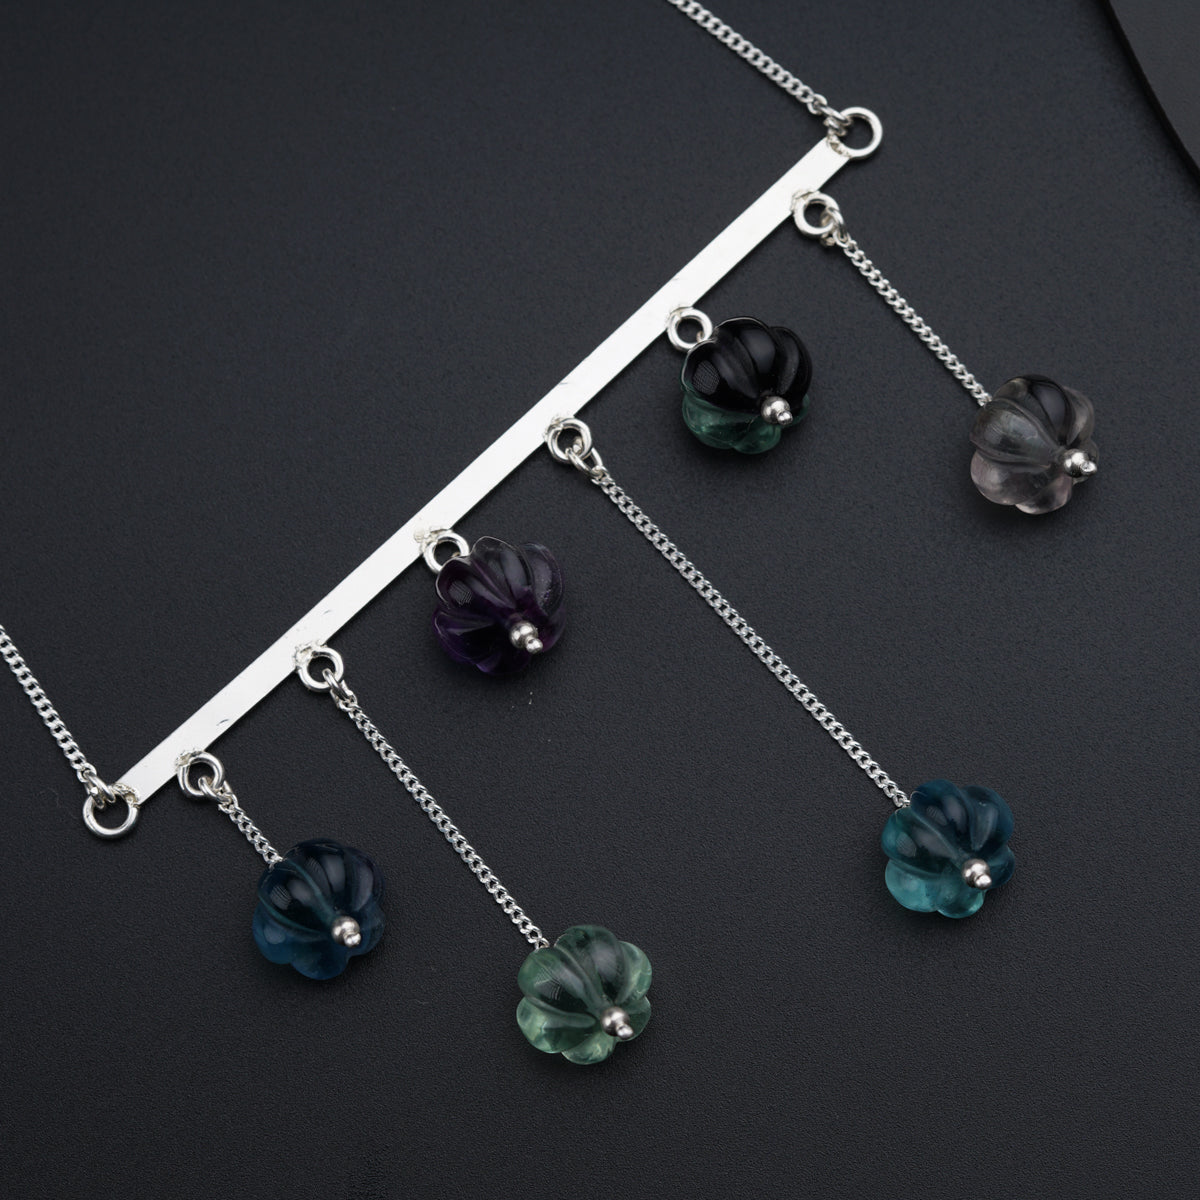 Abstract Silver Necklace with Fluorite Stones